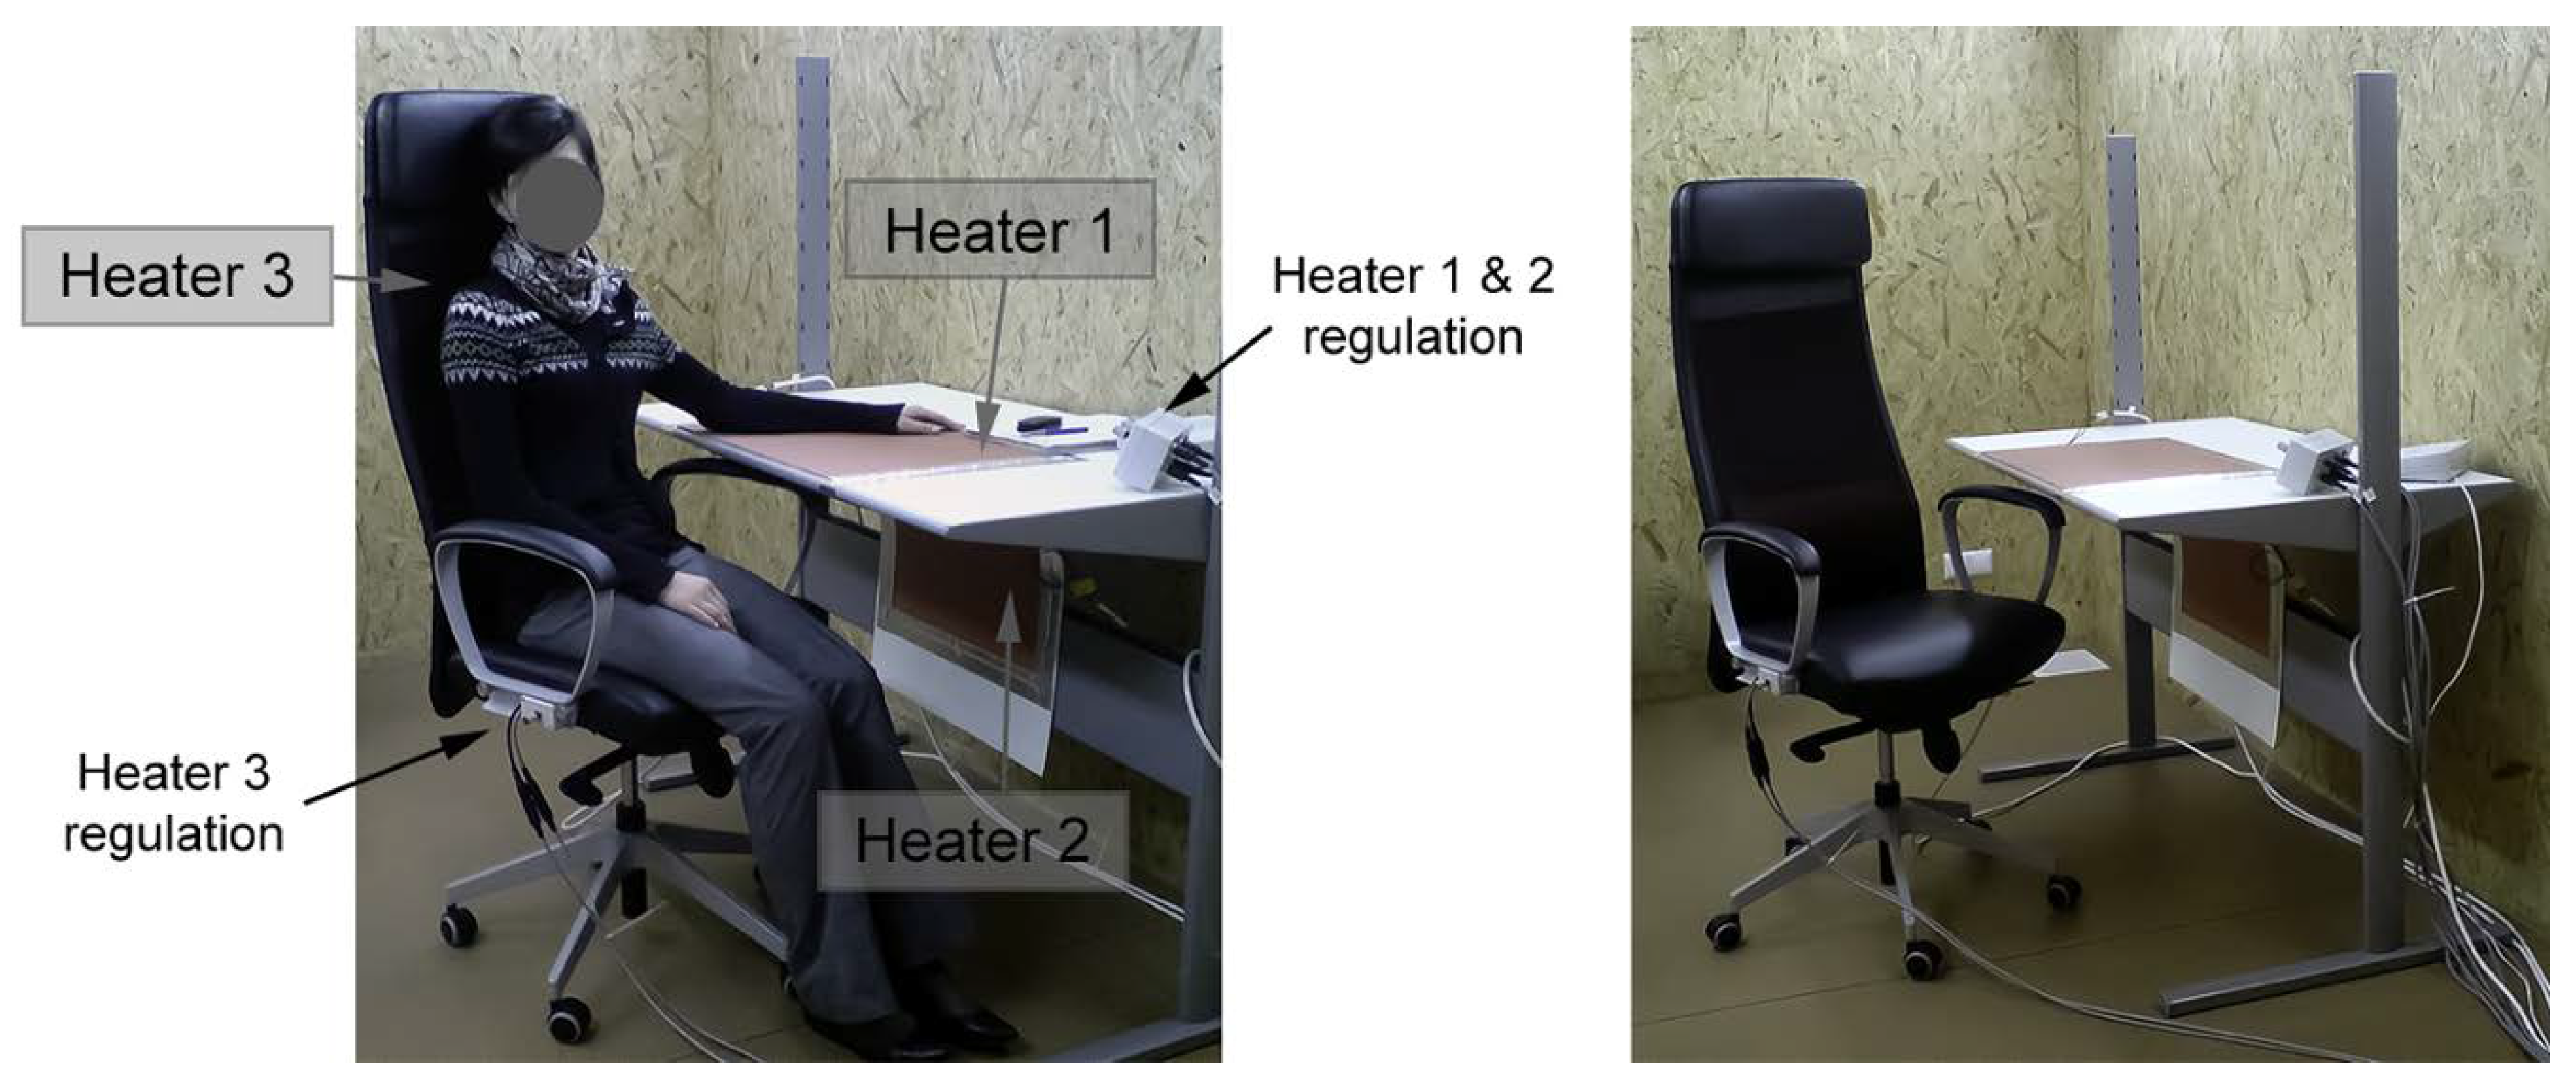 How to Achieve Optimal Thermal Comfort in an Office With Large